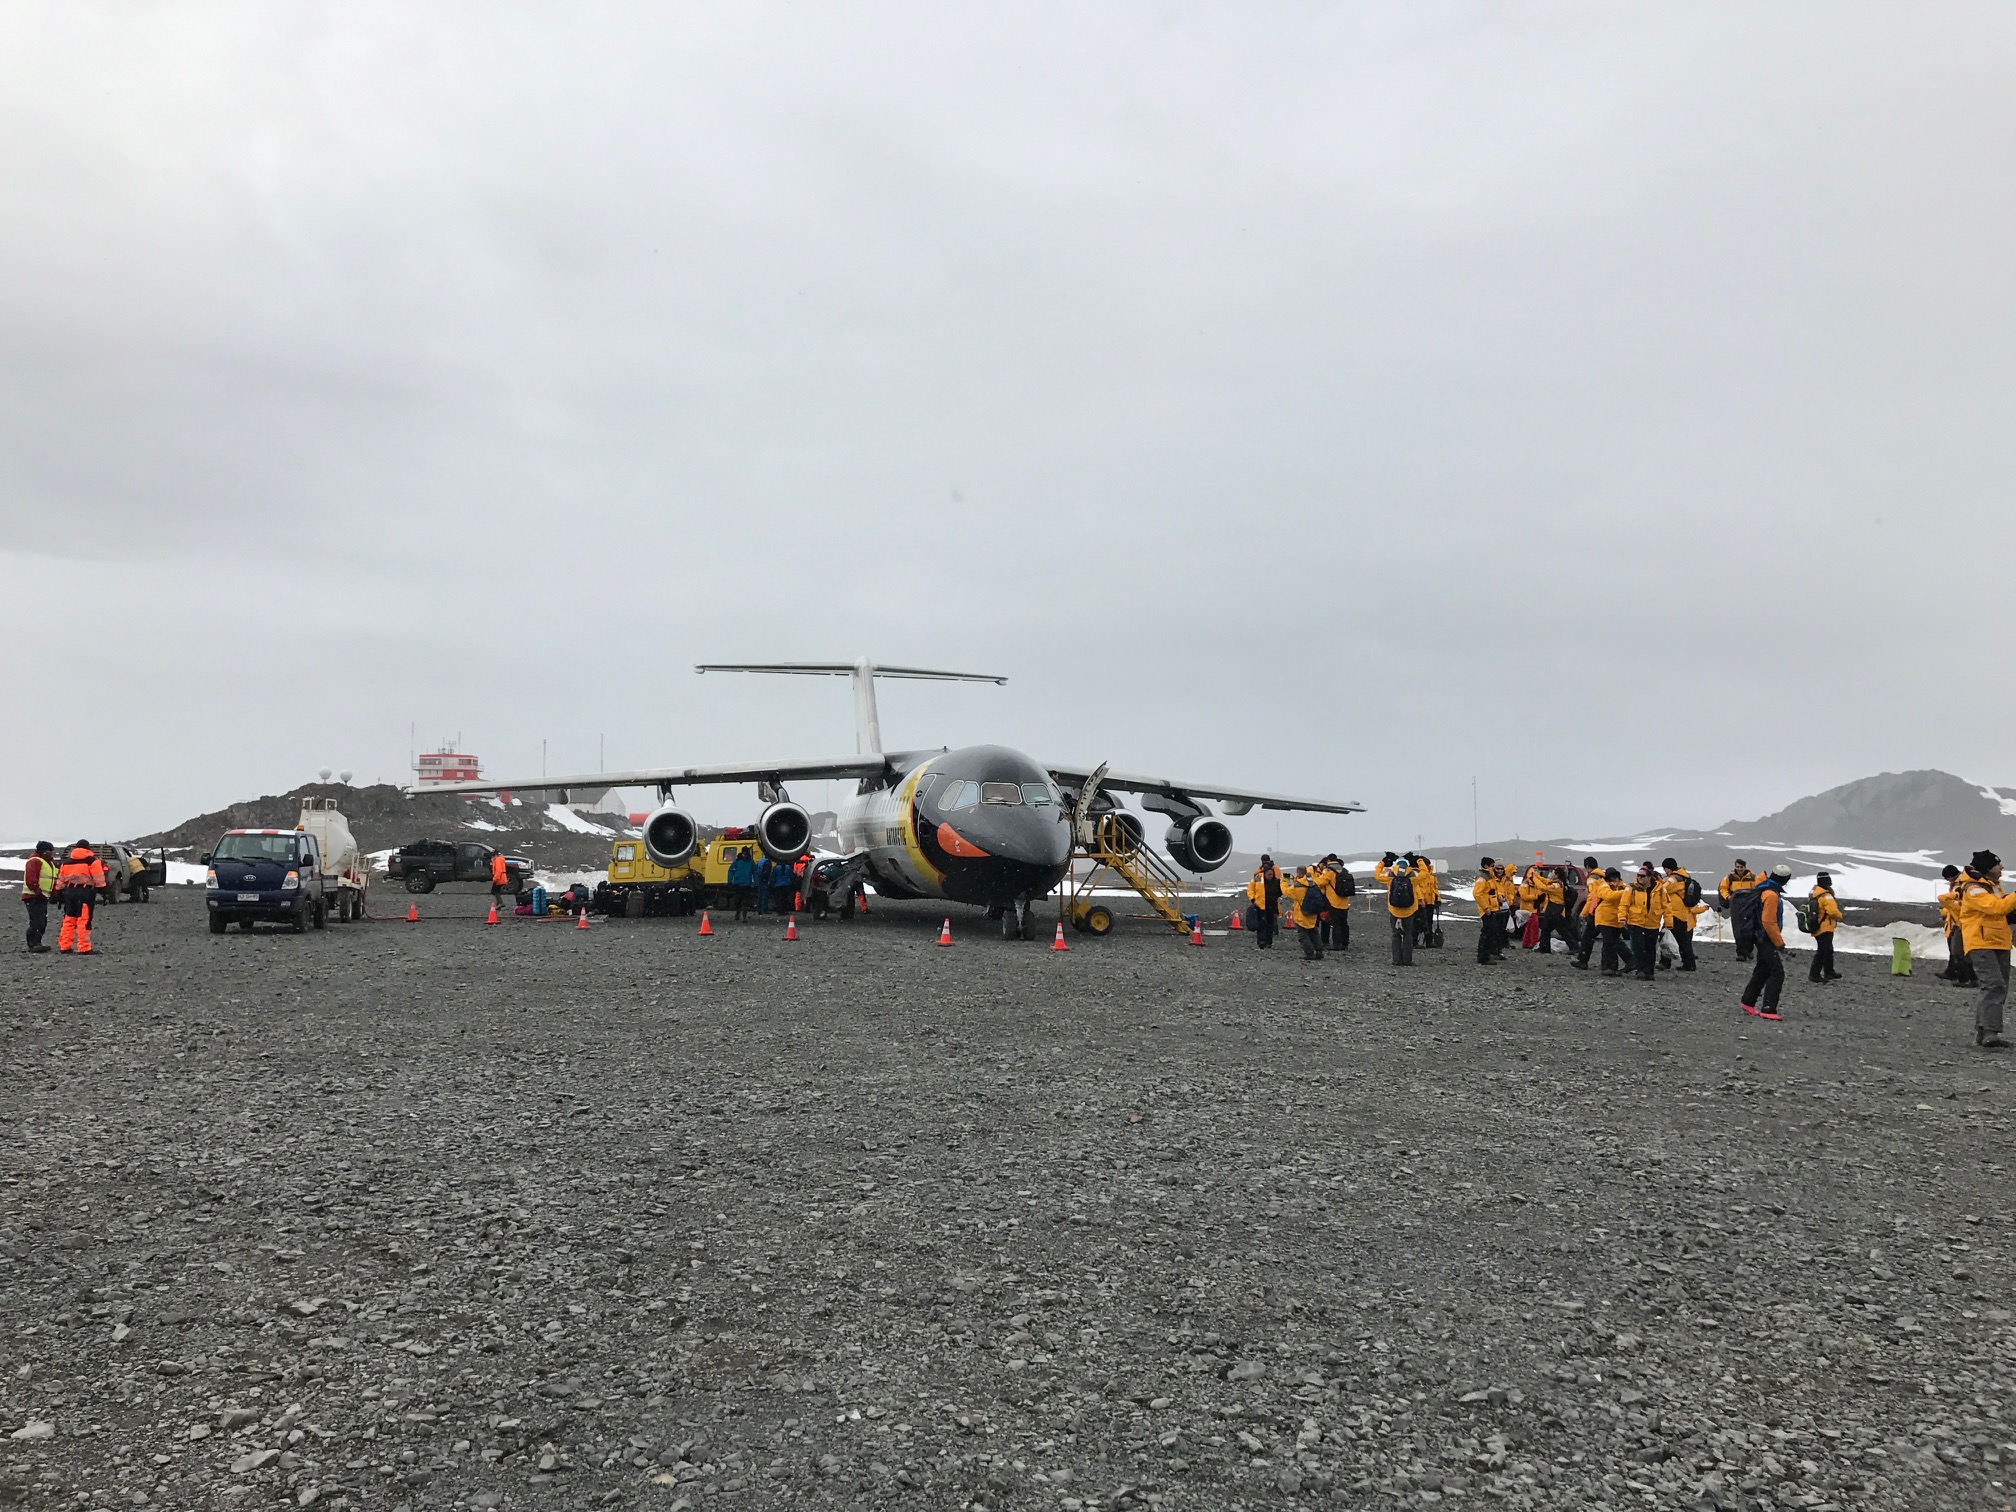 Passengers set foot on King George Island after a comfortable charter flight over the Drake Passage on a Fly-Cruise expedition to Antarctica.